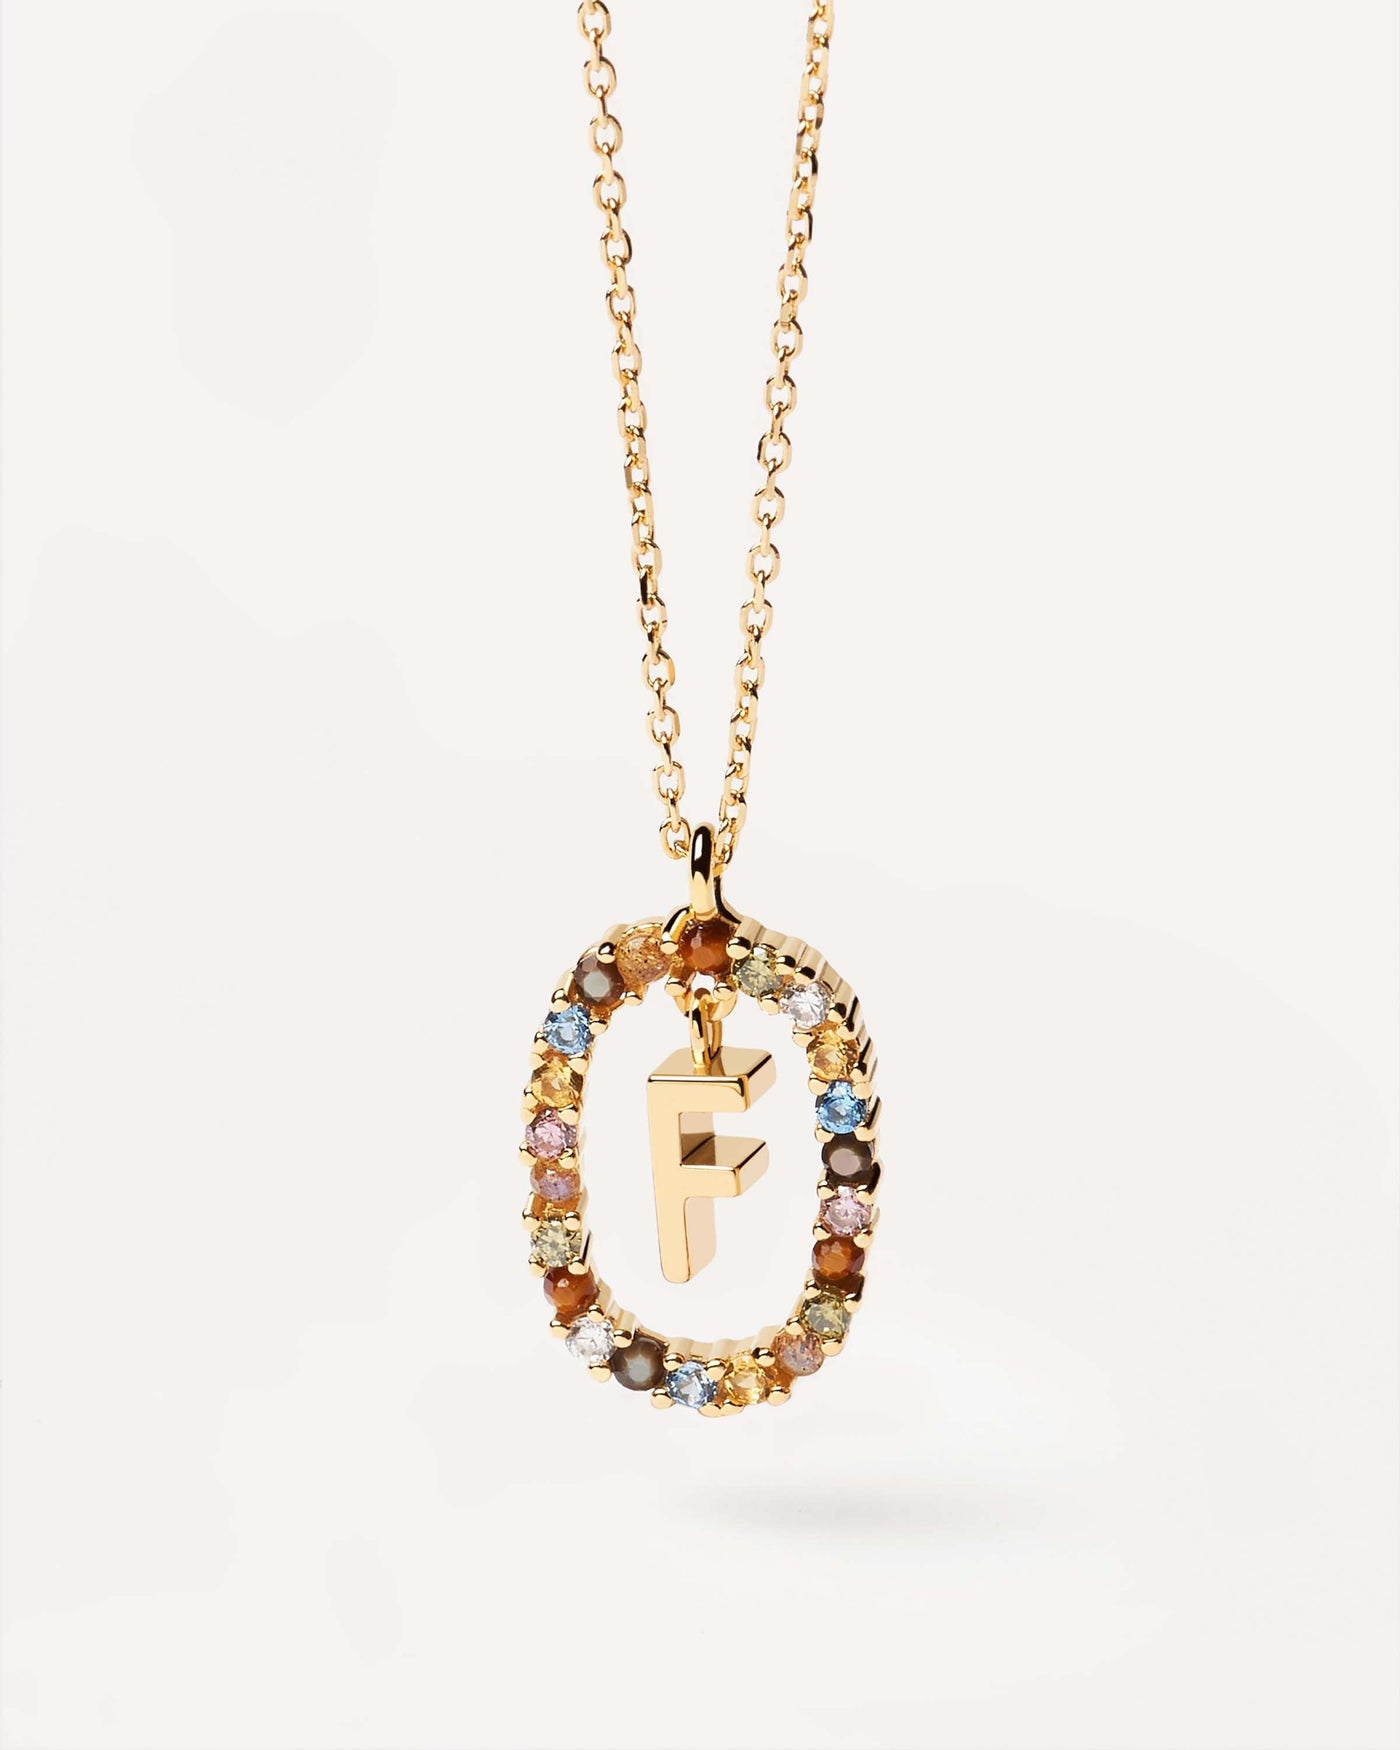 2023 Selection | Letter F necklace. Initial F necklace in gold-plated silver, circled by colorful gemstones. Get the latest arrival from PDPAOLA. Place your order safely and get this Best Seller. Free Shipping.